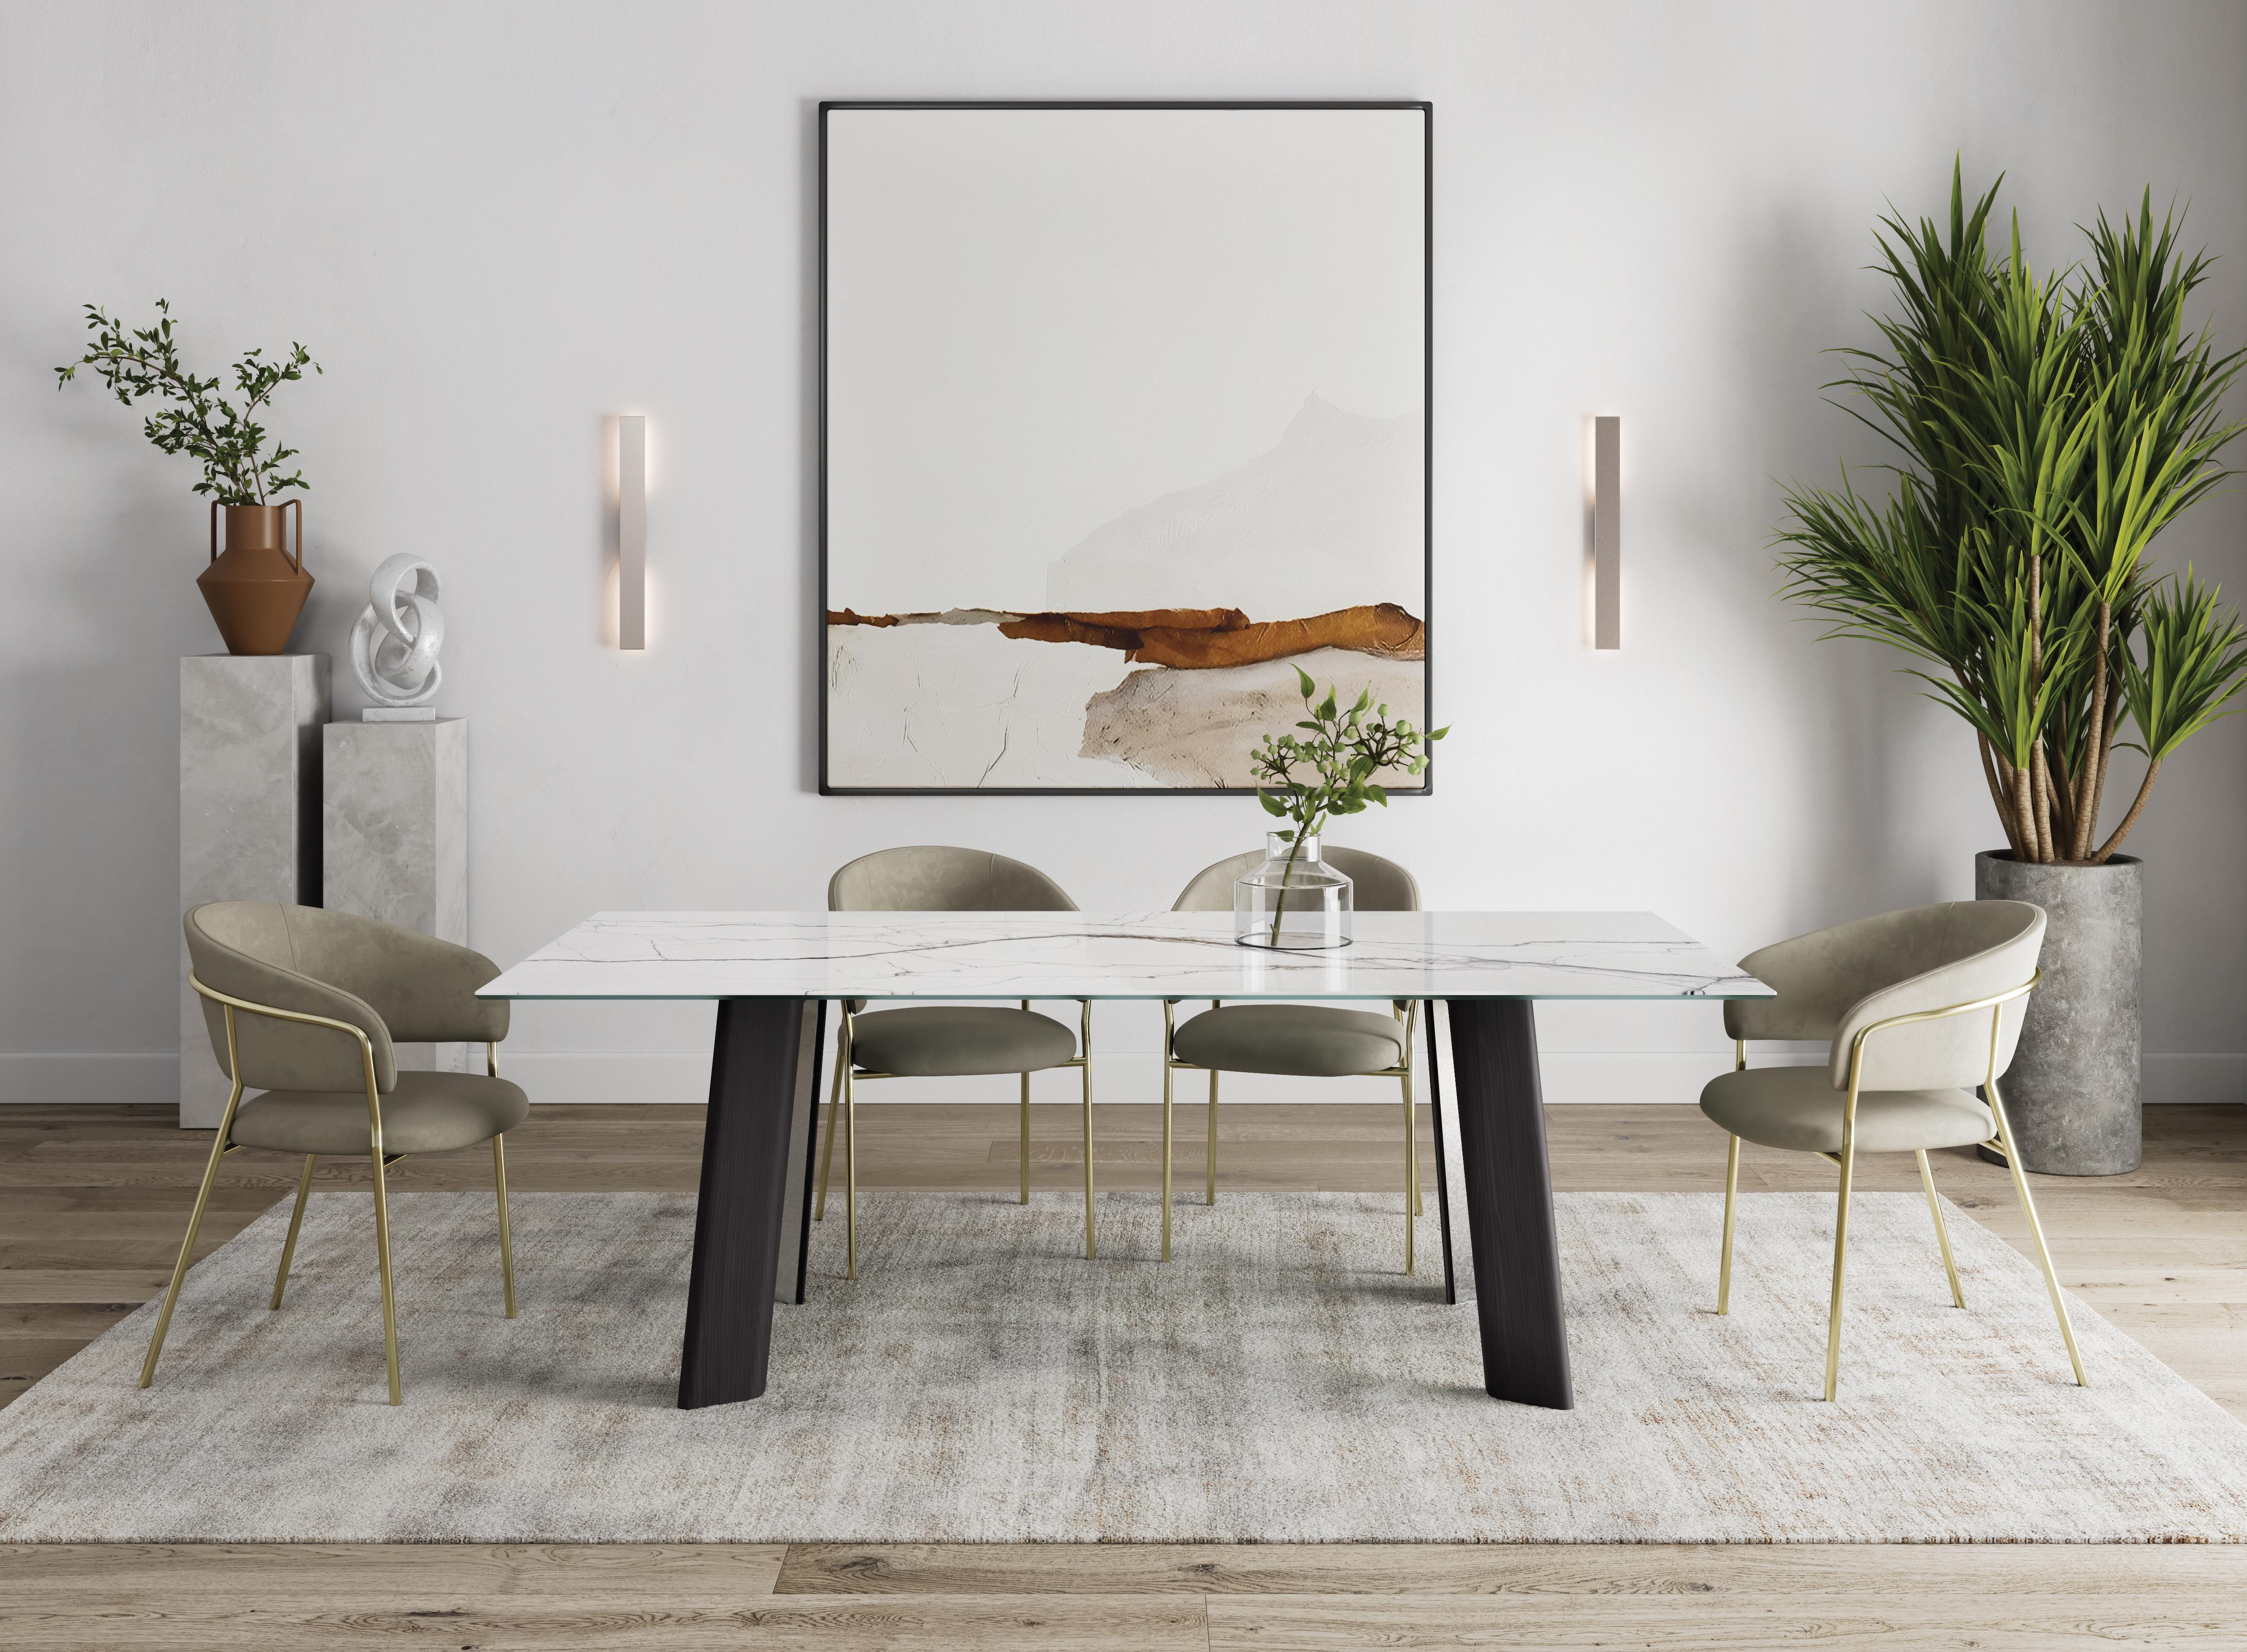 Afrodite Dining Table by Chinellato Design
Dimensions: W 250 x D 120 x H 72 cm
Materials: Top: Glossy Ceramic Breach White with an extra clear tempered glass under-top.
Base: Smoked Gray Oak, Chabin silver leaf insert.  


The base features an MDF